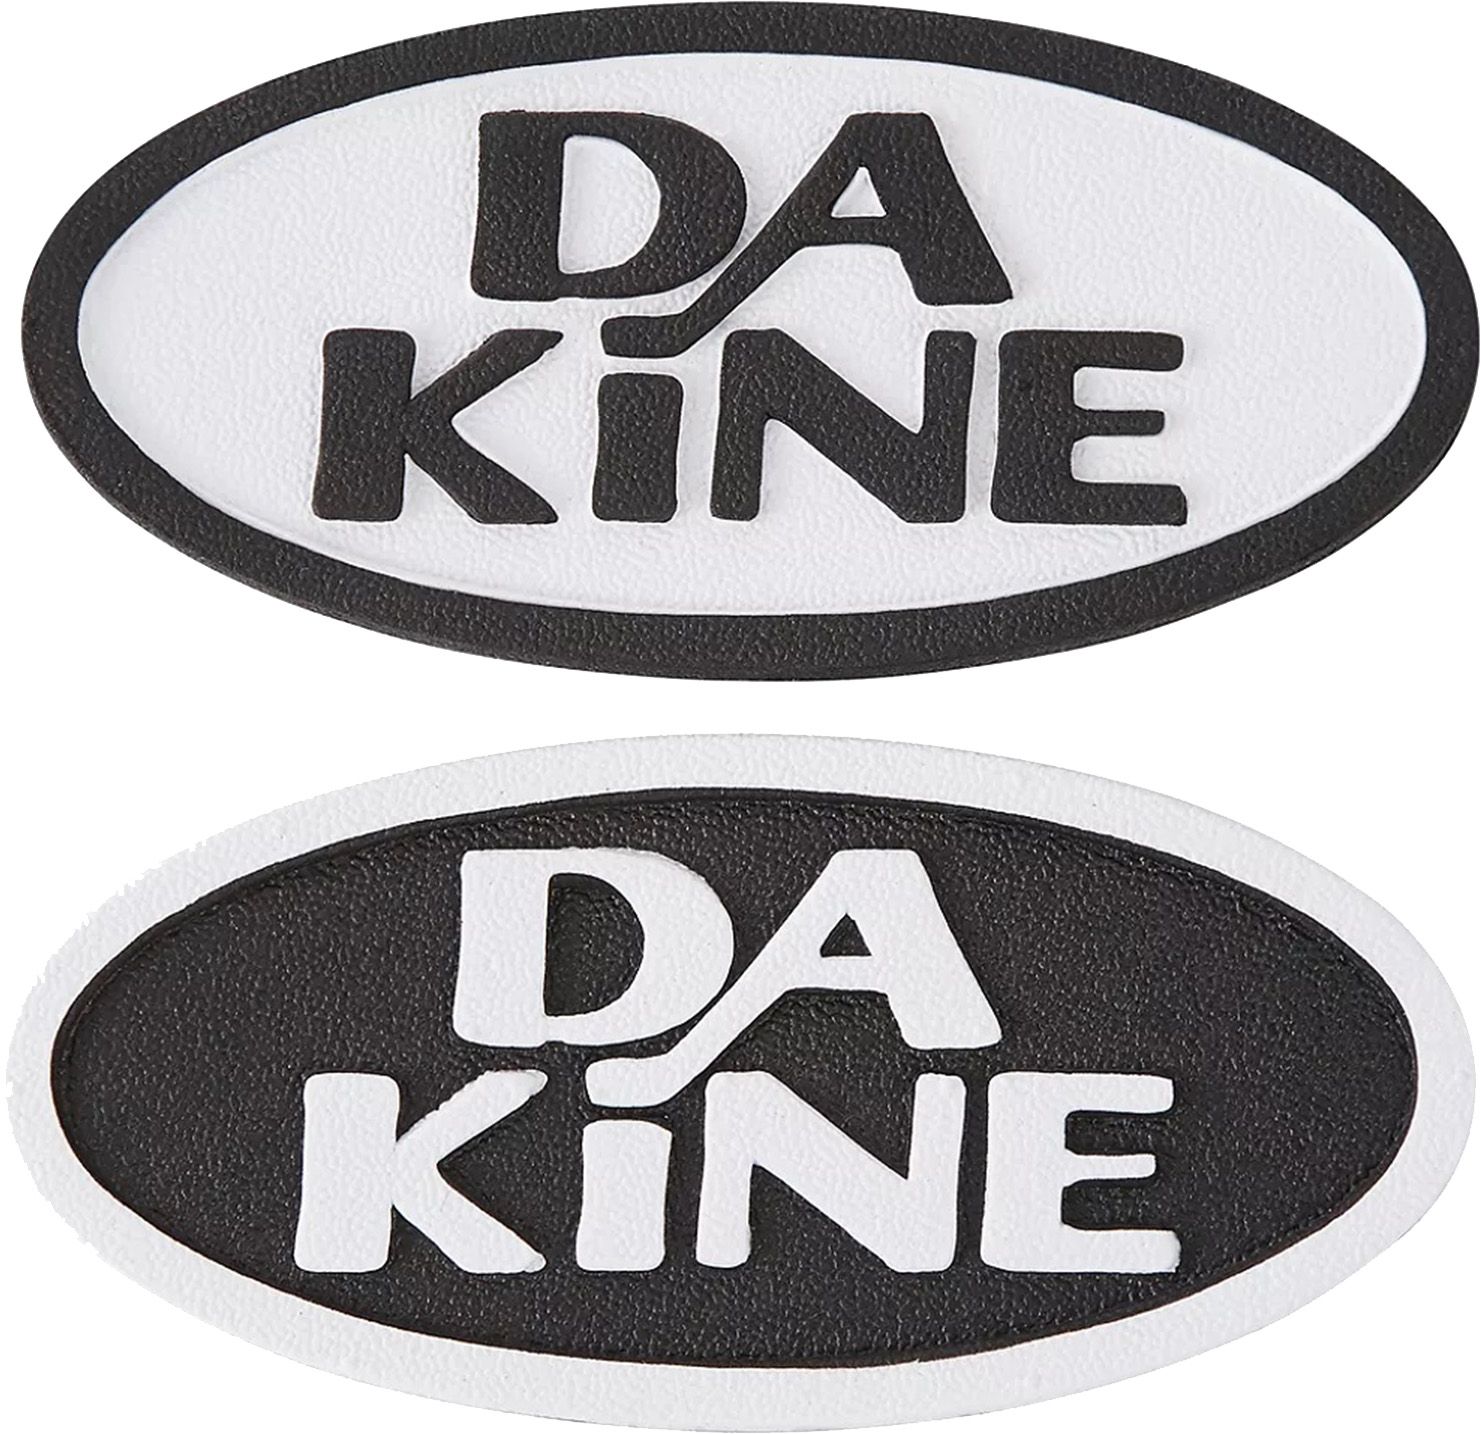 Photos - Other for Winter Sports DAKINE Retro Oval Snowboard Stomp Pad Traction Mat, Black/White D10003290 